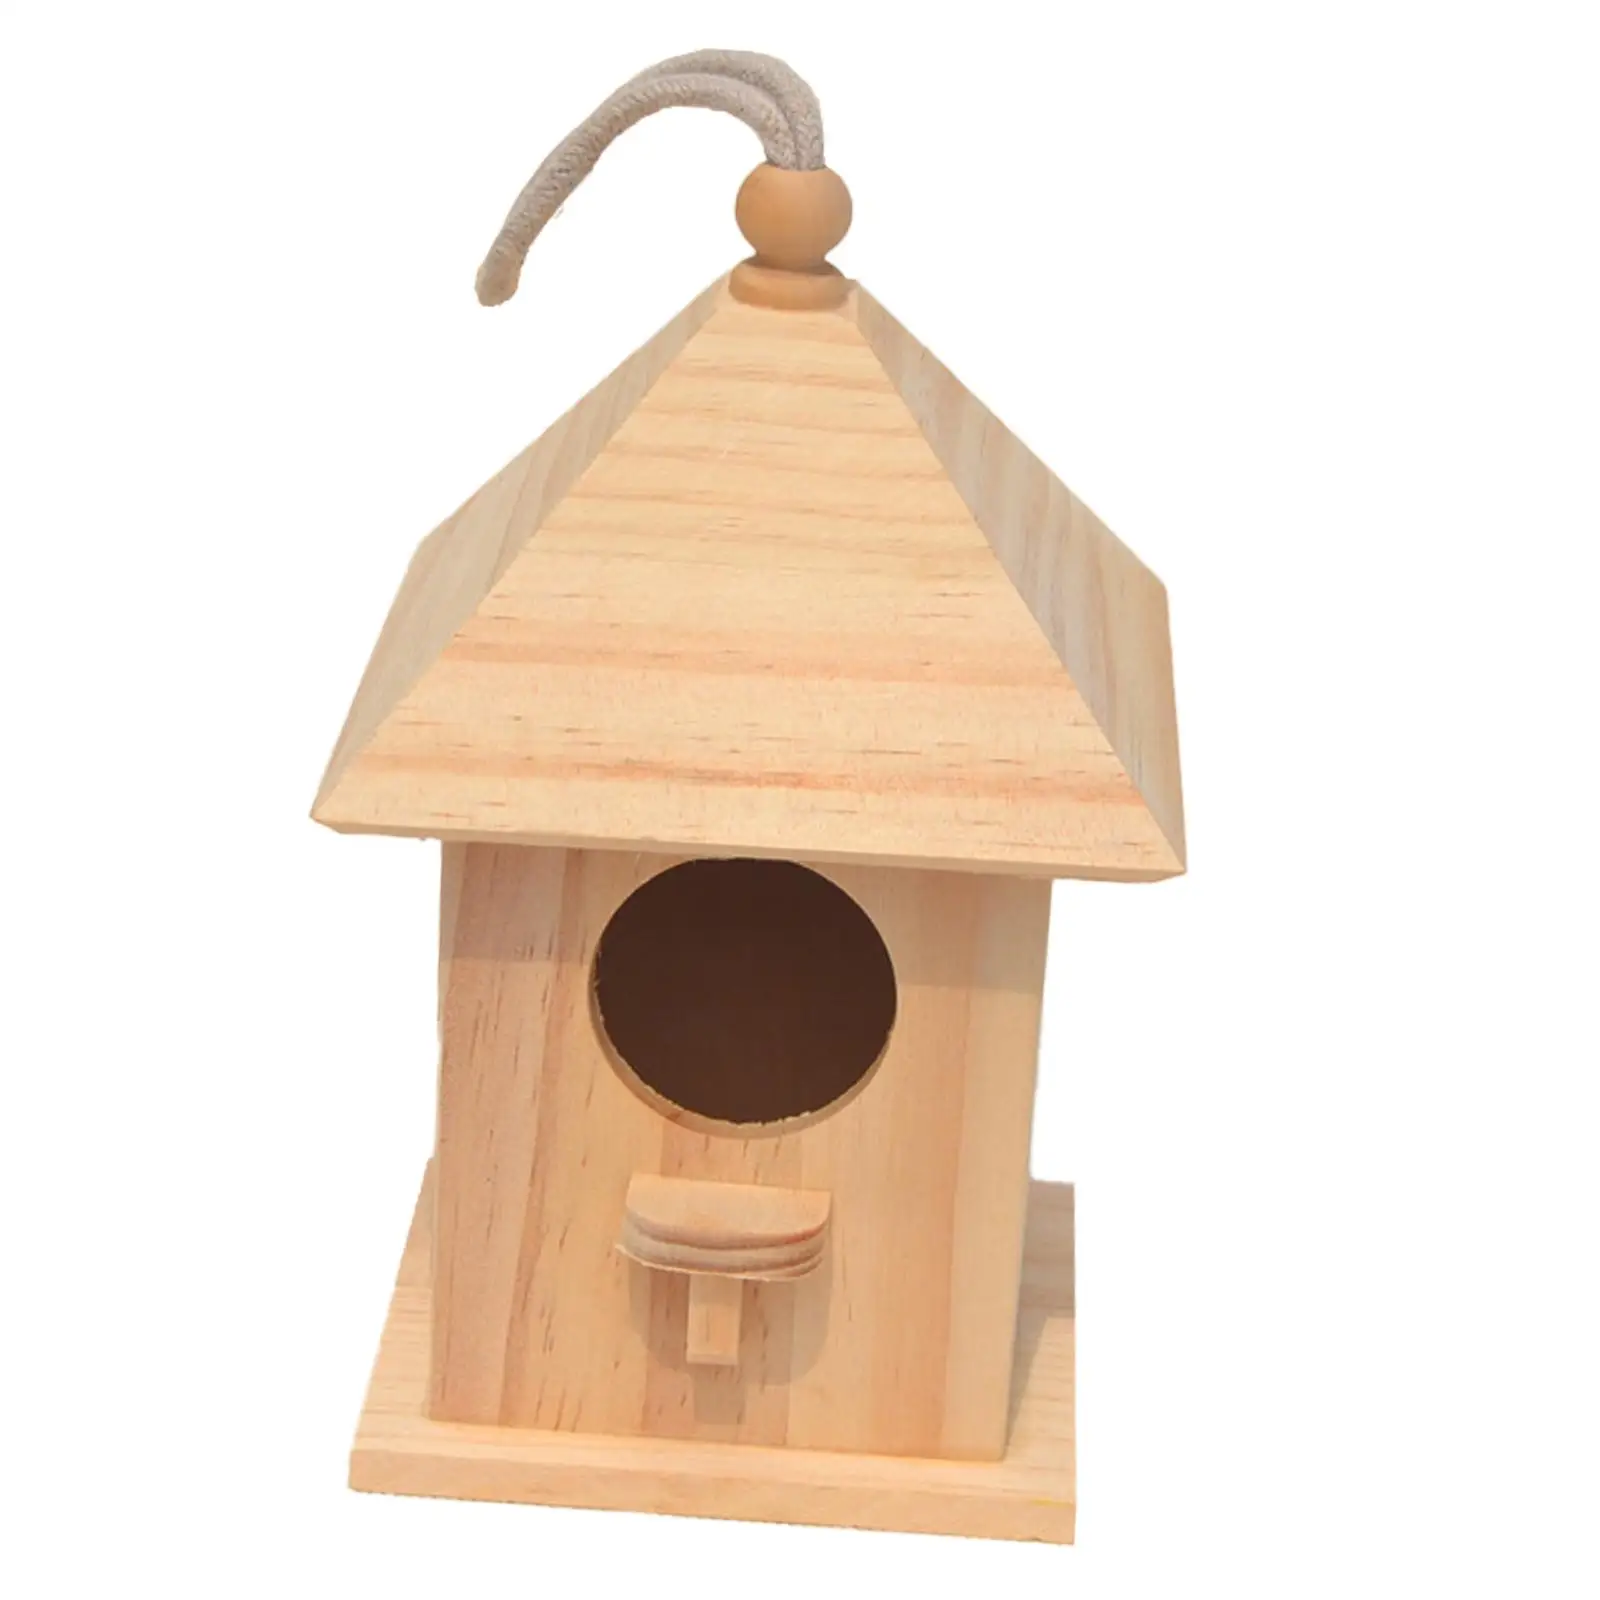 Wooden Birdhouse DIY Arts Crafts Decoration with Viewing Window Doodle Wood Paint Bird House for Yard Small Birds Children Adult